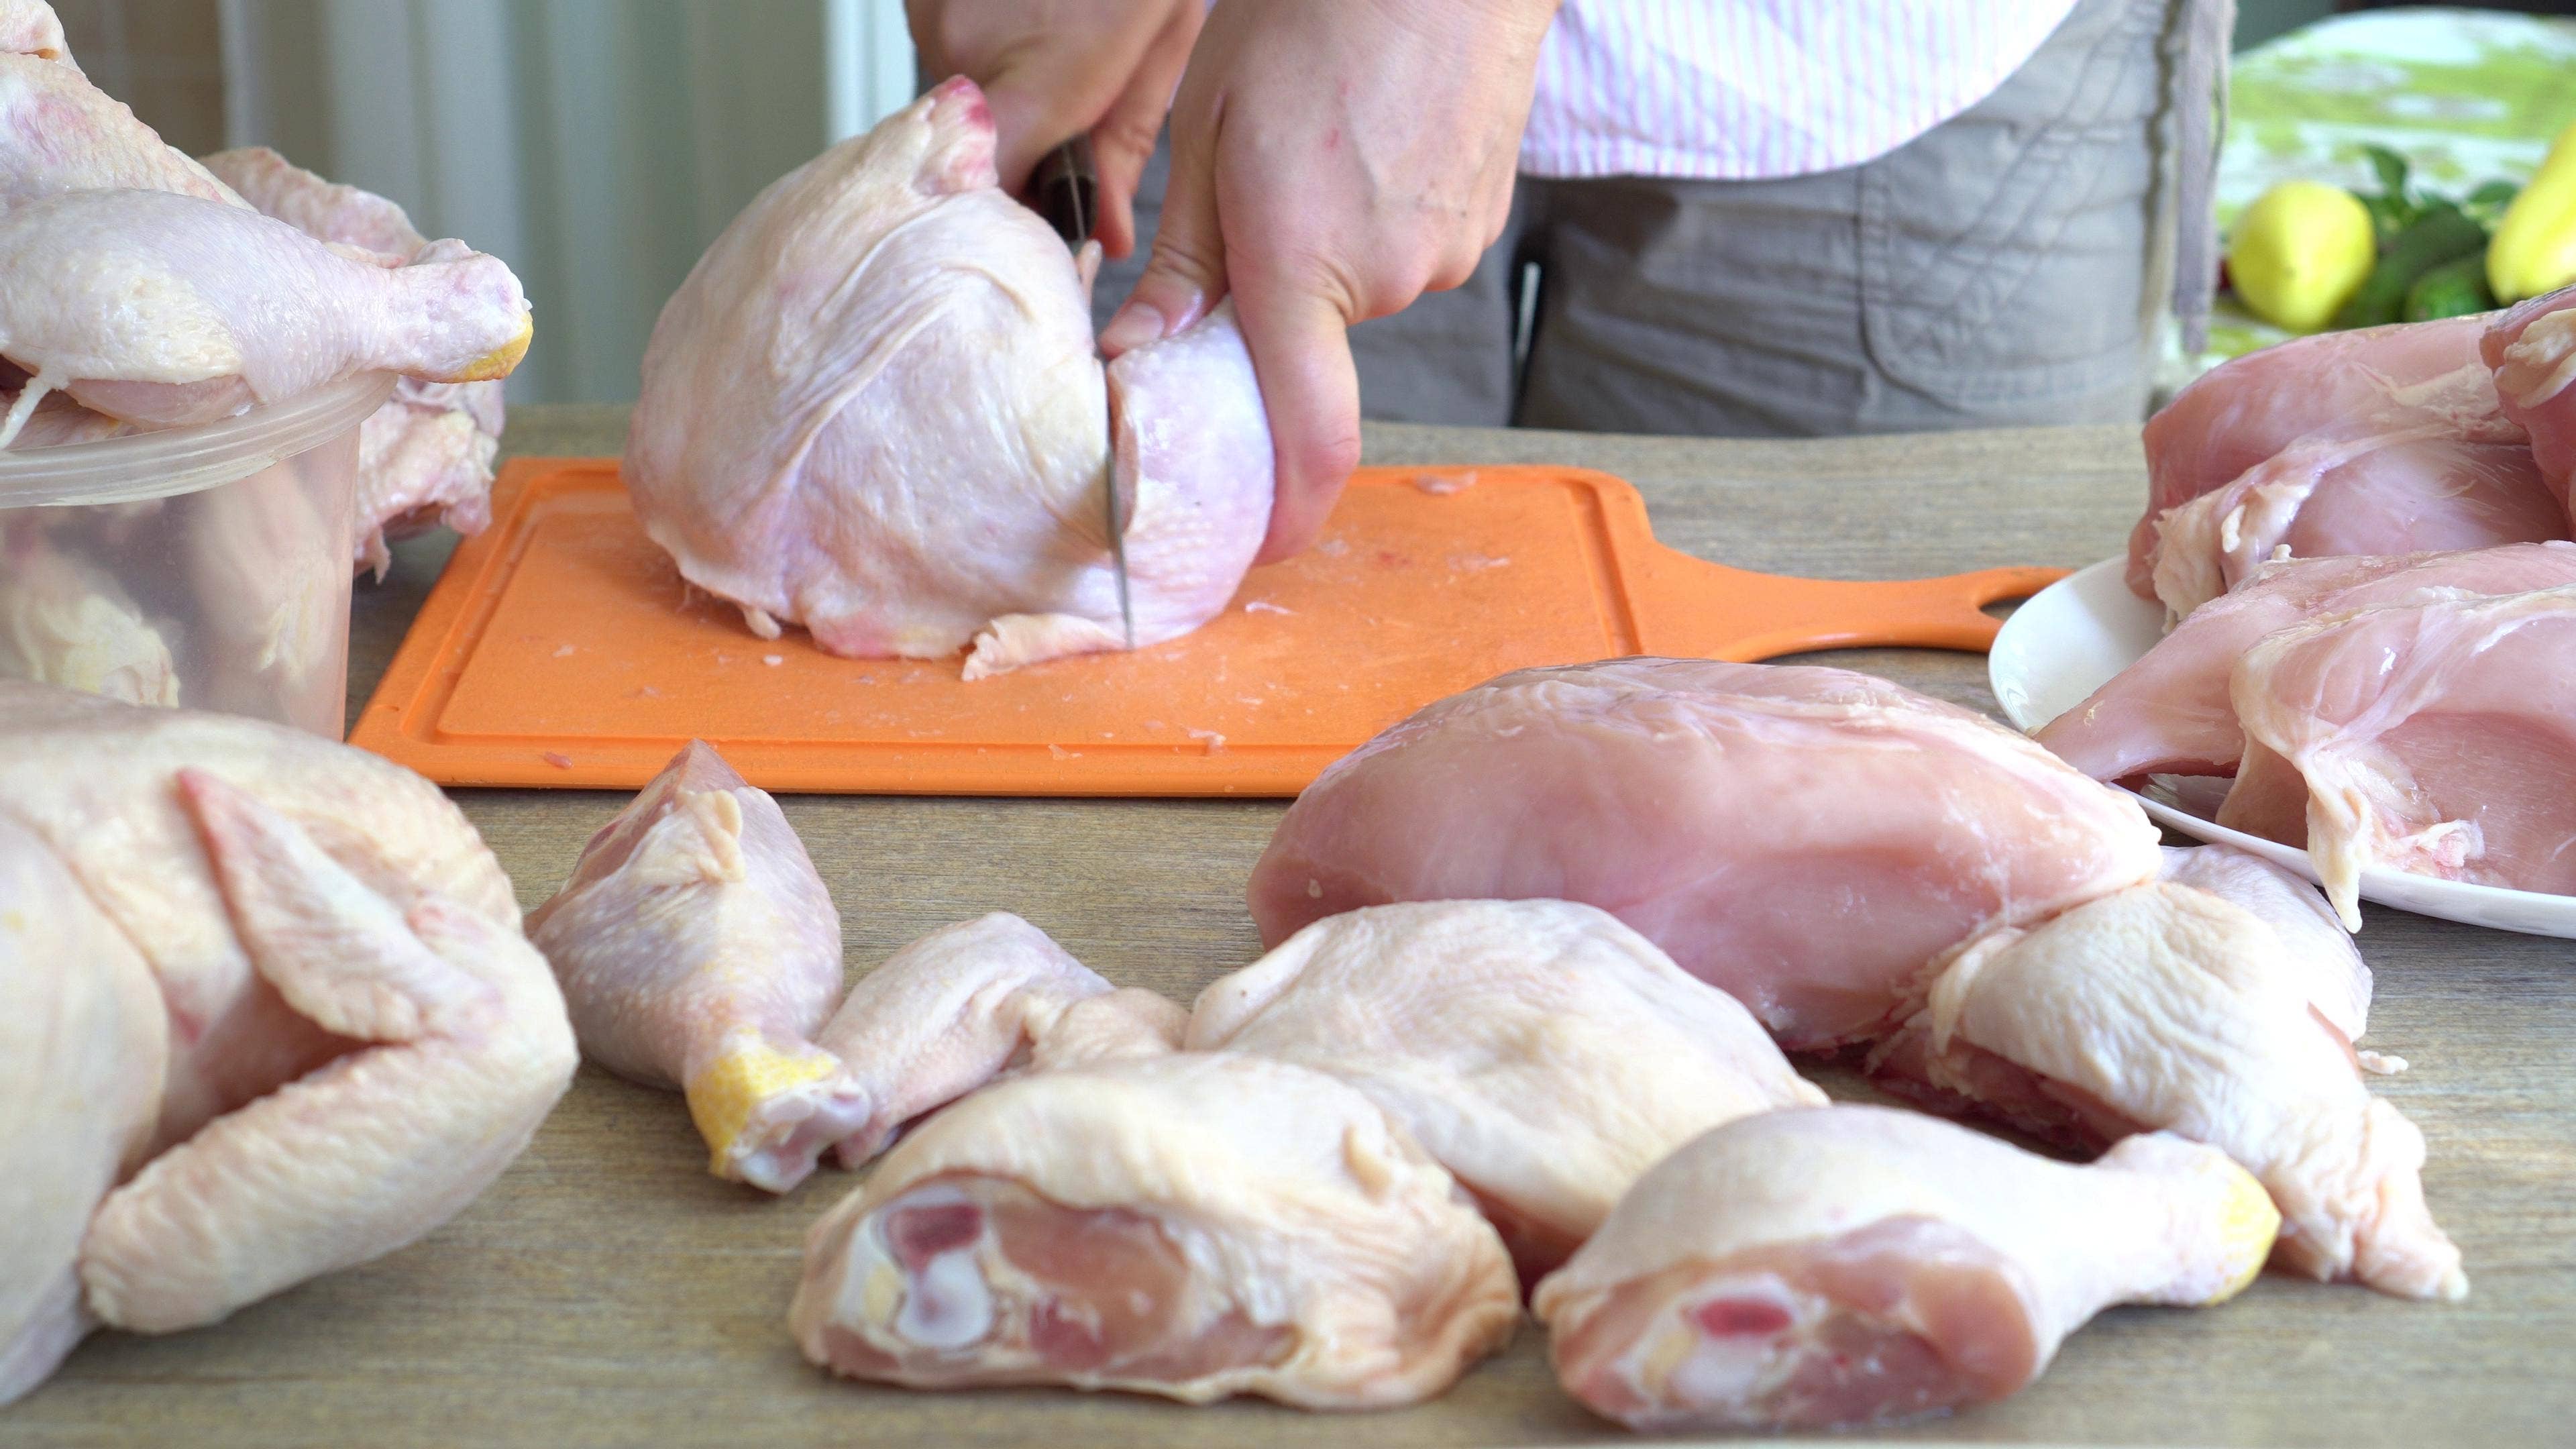 Listeria outbreak linked to precooked chicken causes 1 death, 3 hospitalizations